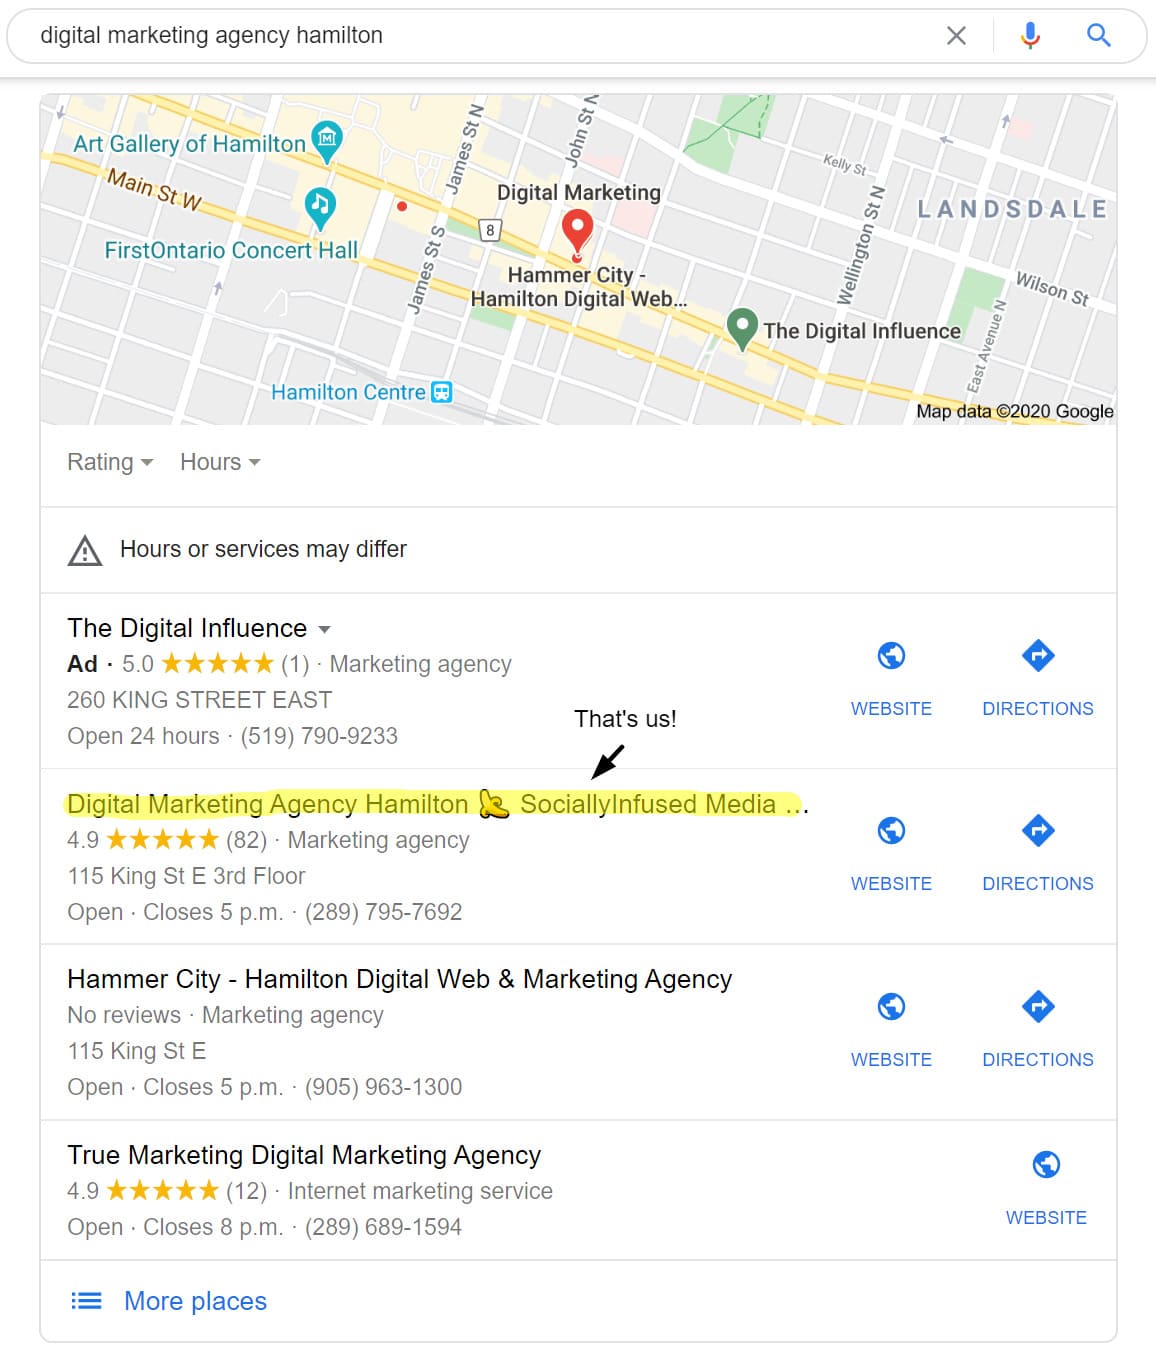 Our agency, SociallyInfused Media, listed on the Google Local 3 Pack with 82 Google reviews.